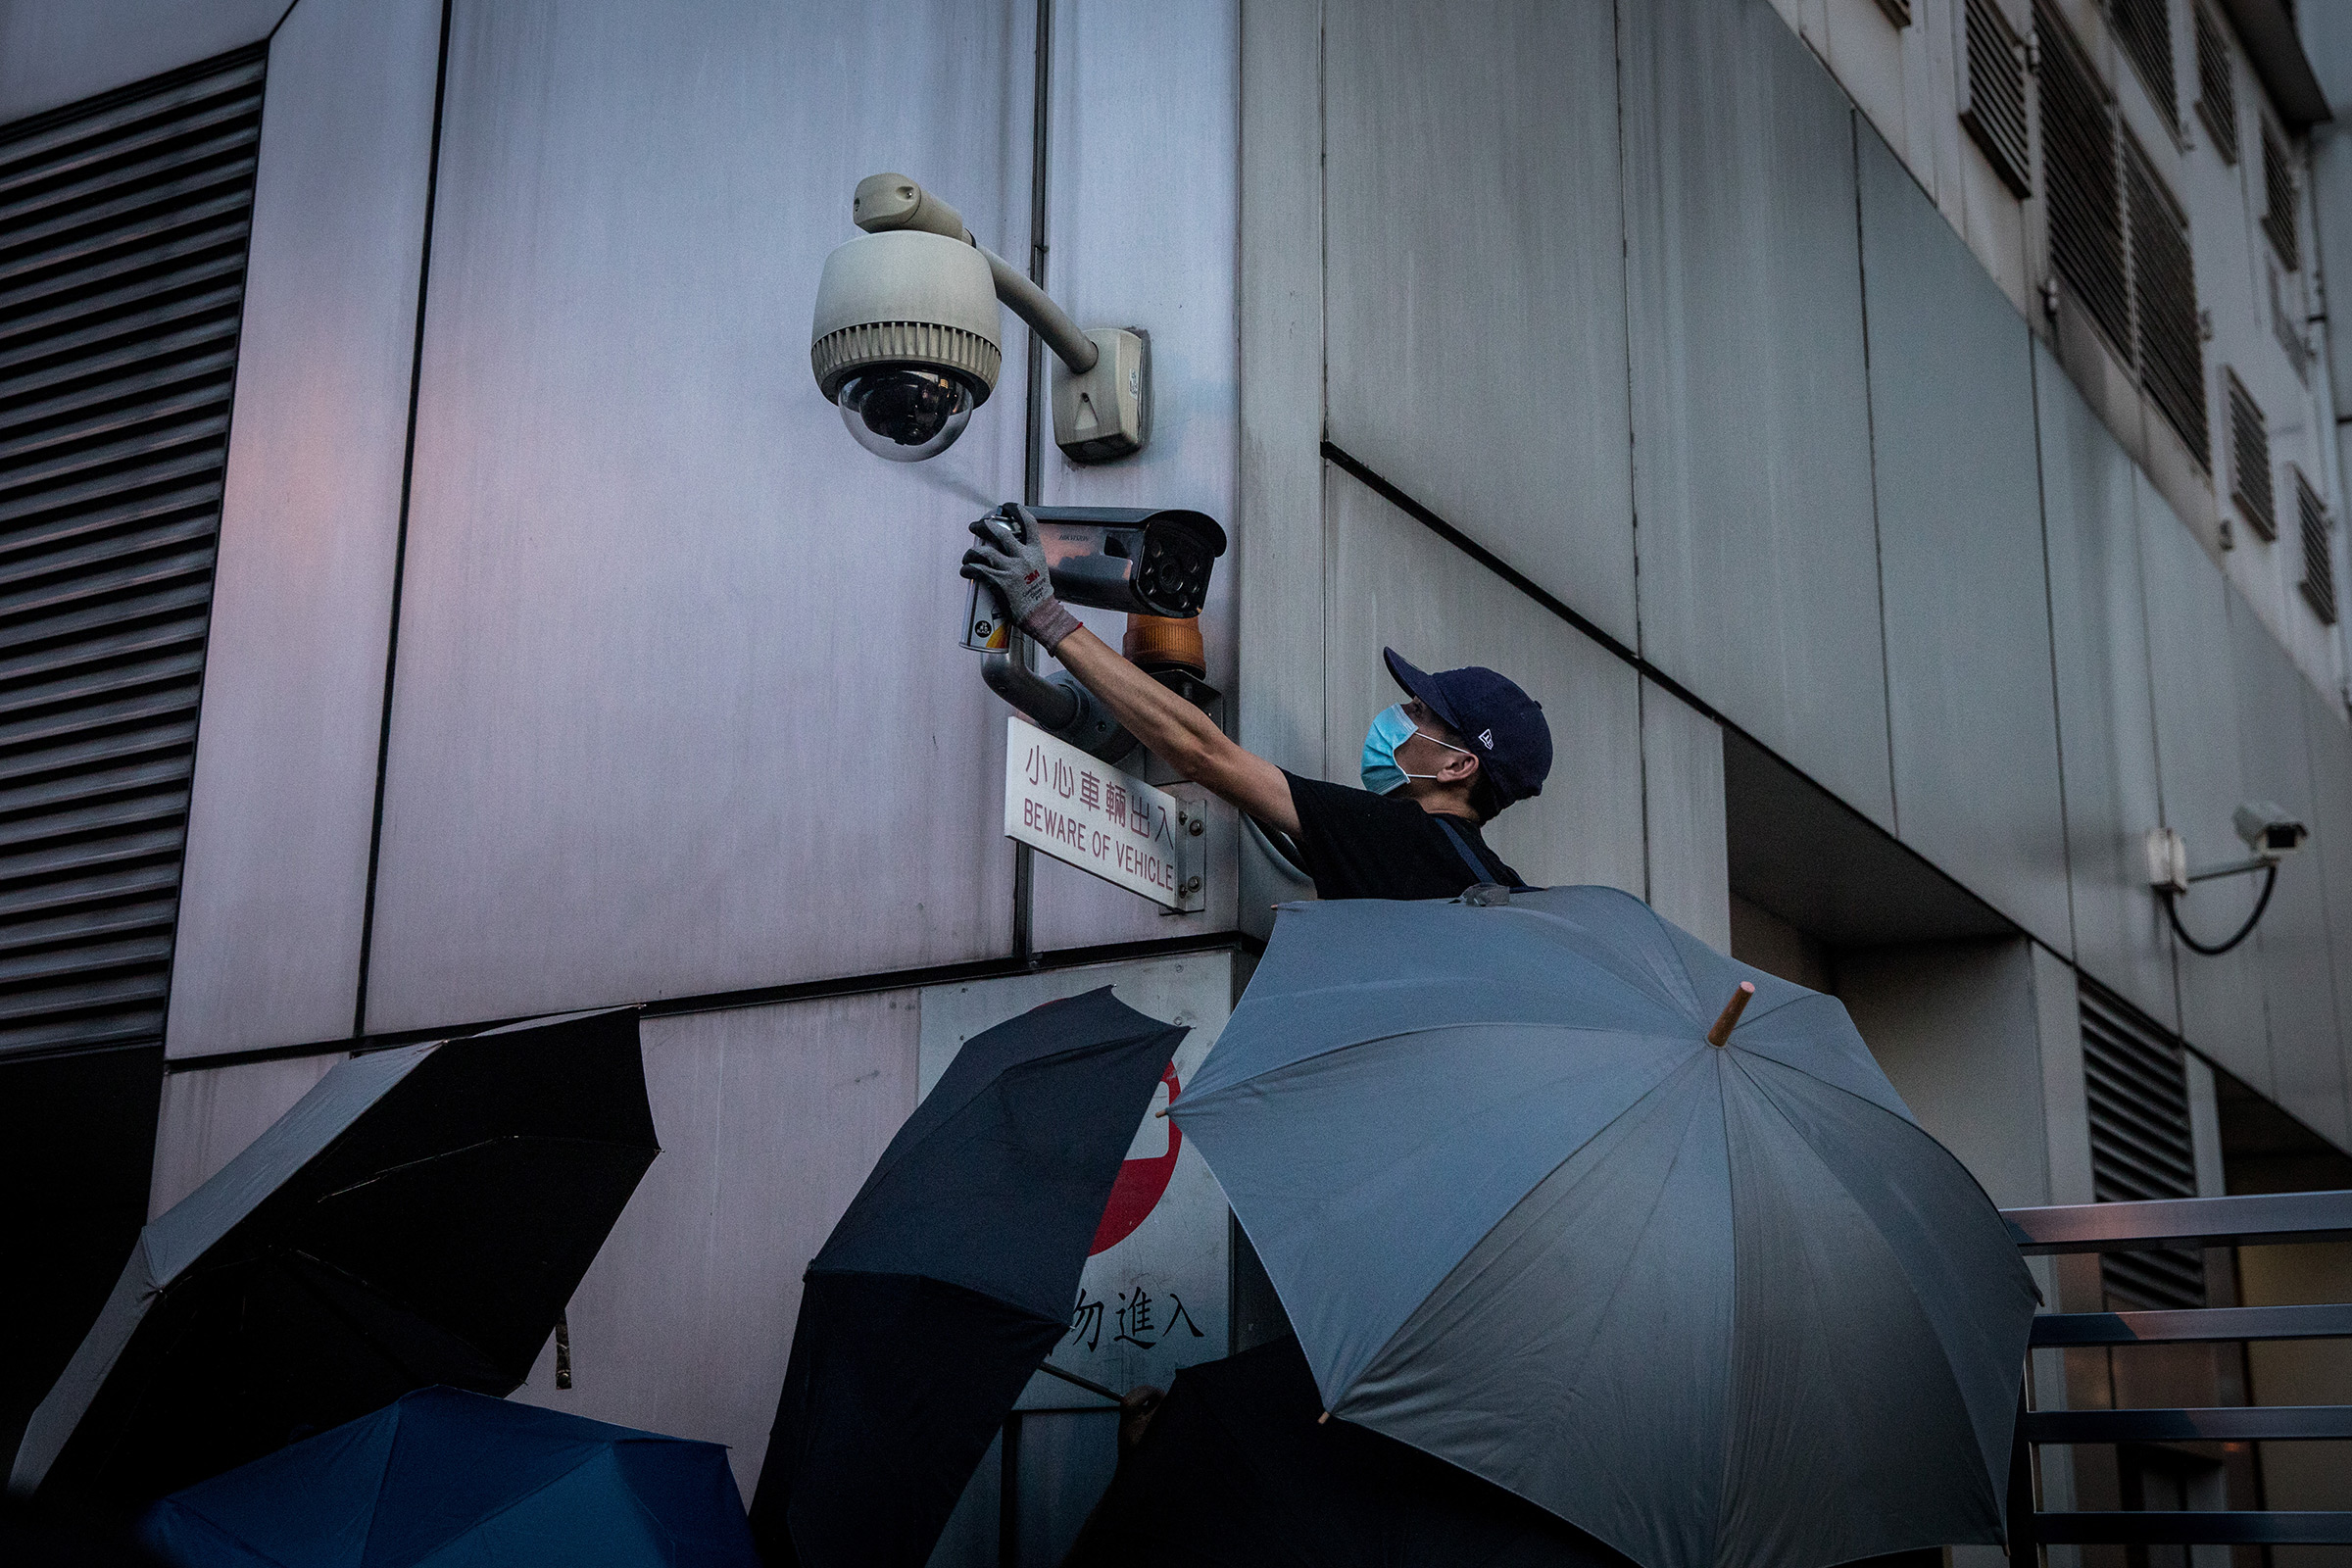 A protester covers a camera outside a government office in Hong Kong in July